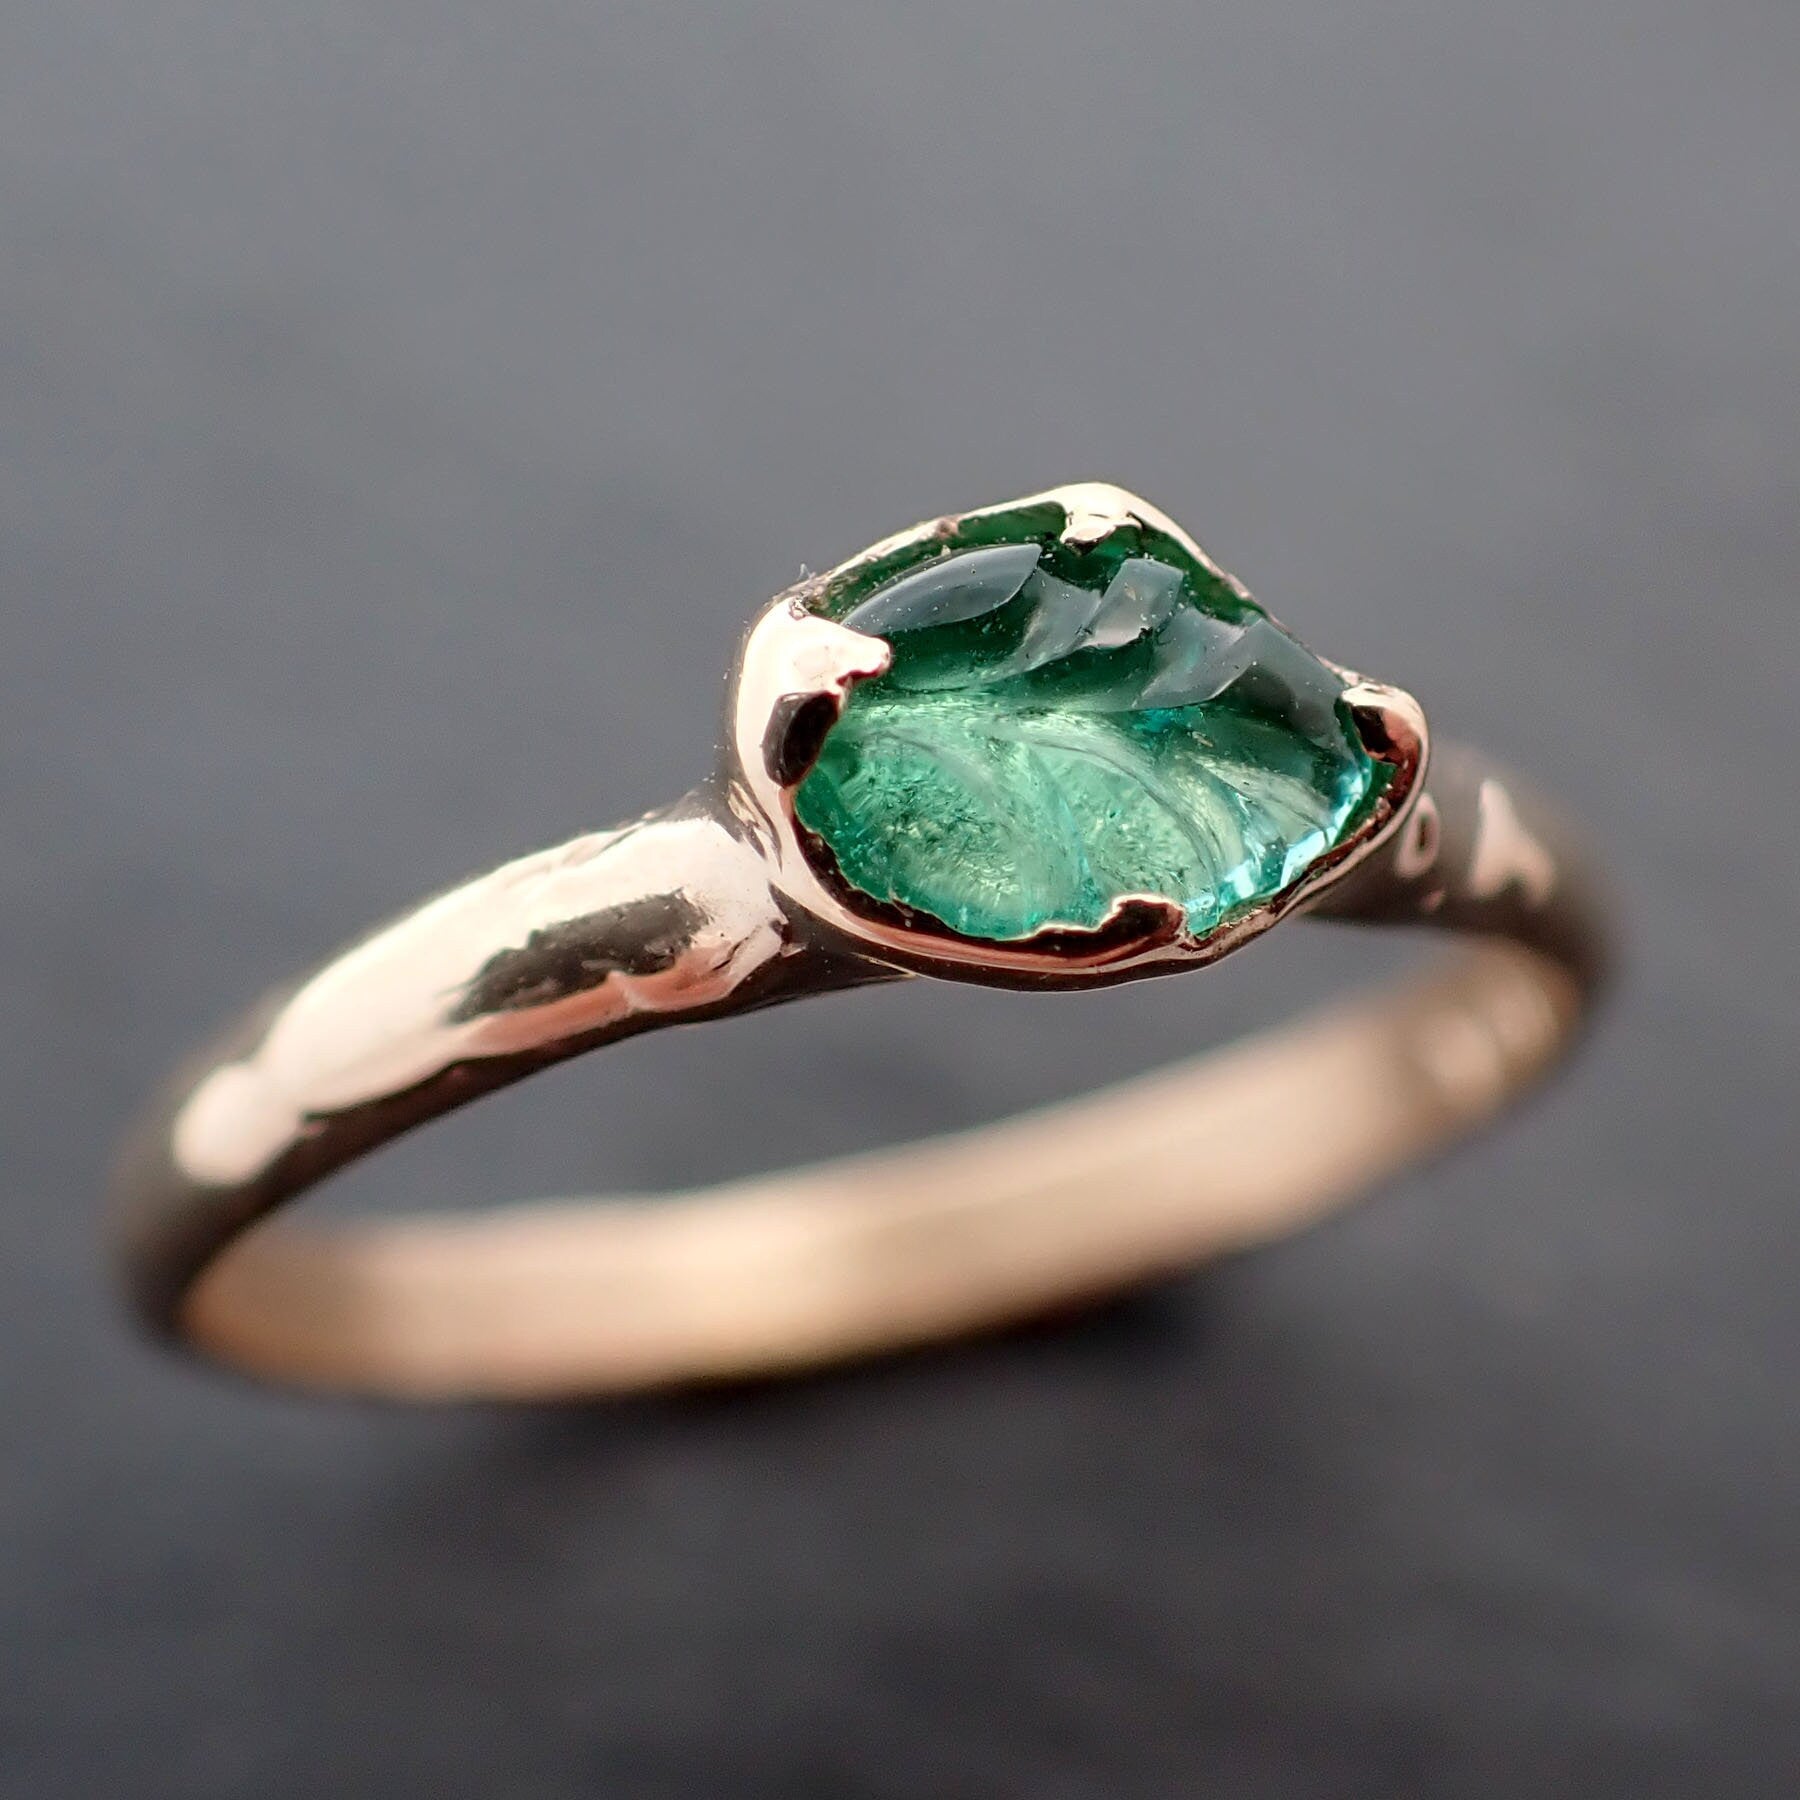 Carved Leaf Emerald Solitaire yellow 14k Gold Ring Birthstone One Of a Kind Gemstone Ring Recycled 3387